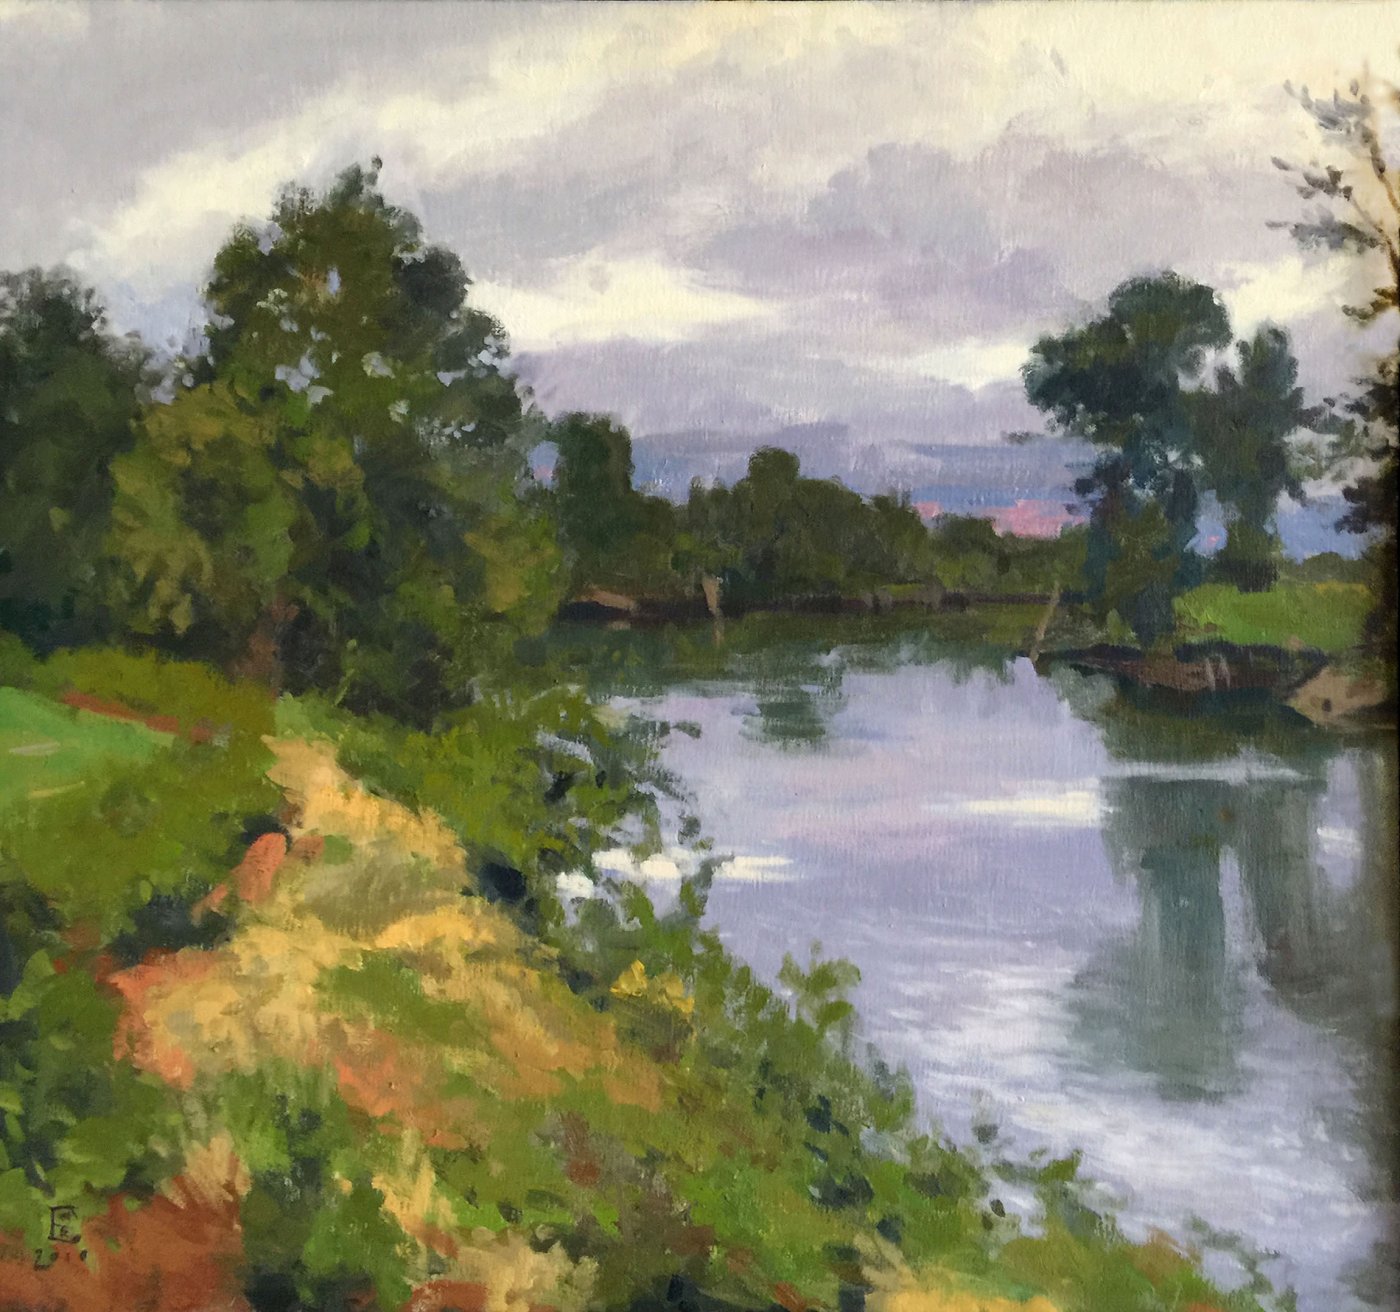 Bend In The River, oil on canvas, 30 x 32 inches, copyright ©2010, $3,800